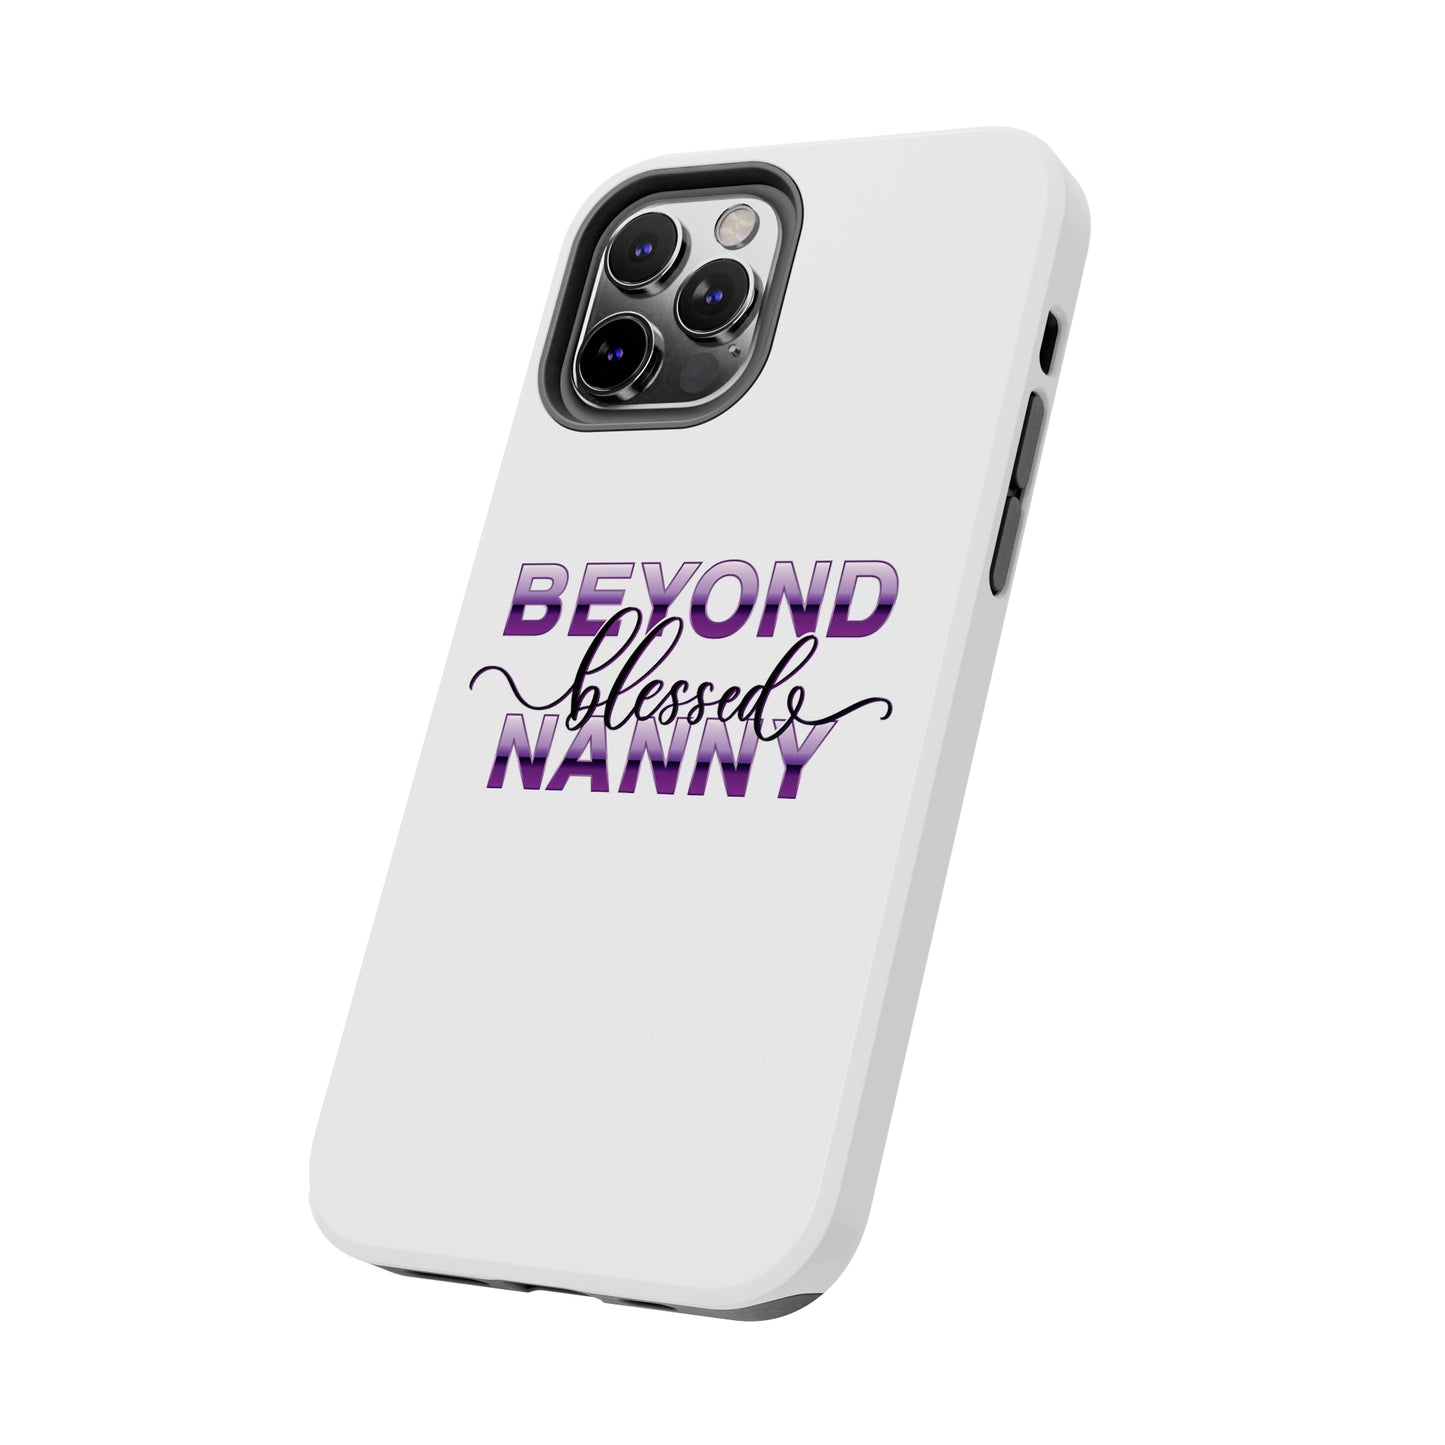 Beyond Blessed Nanny - Purple - Tough iPhone Cases